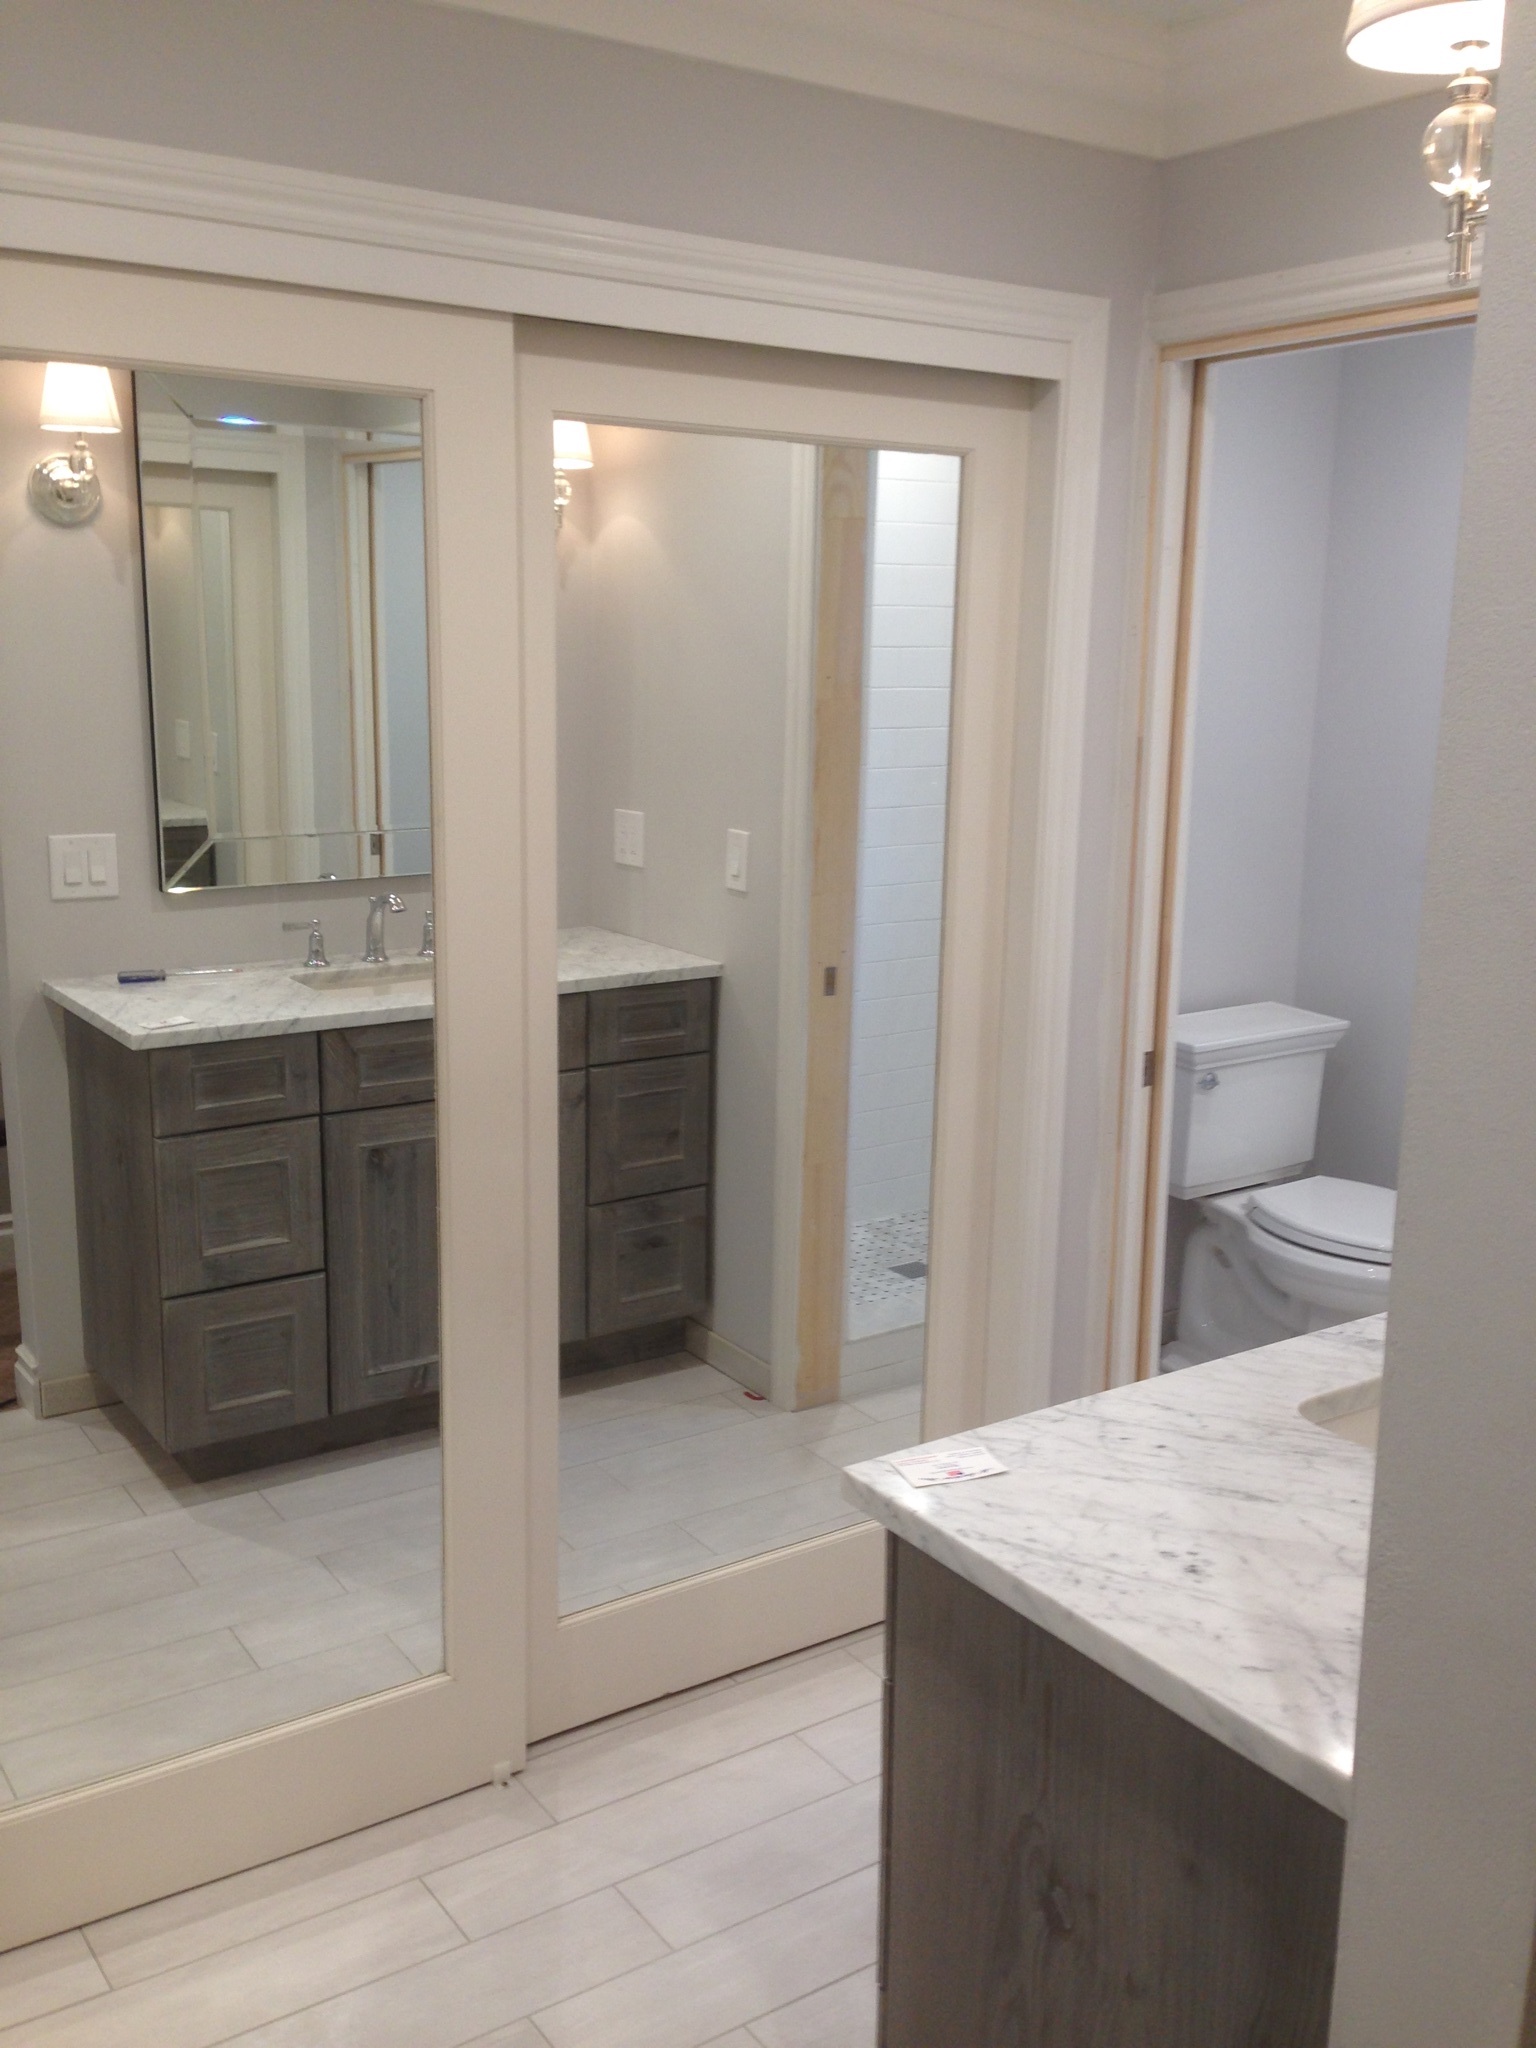 Outdated Master Bathroom Opens Up With, Are Mirrored Closet Doors Outdated